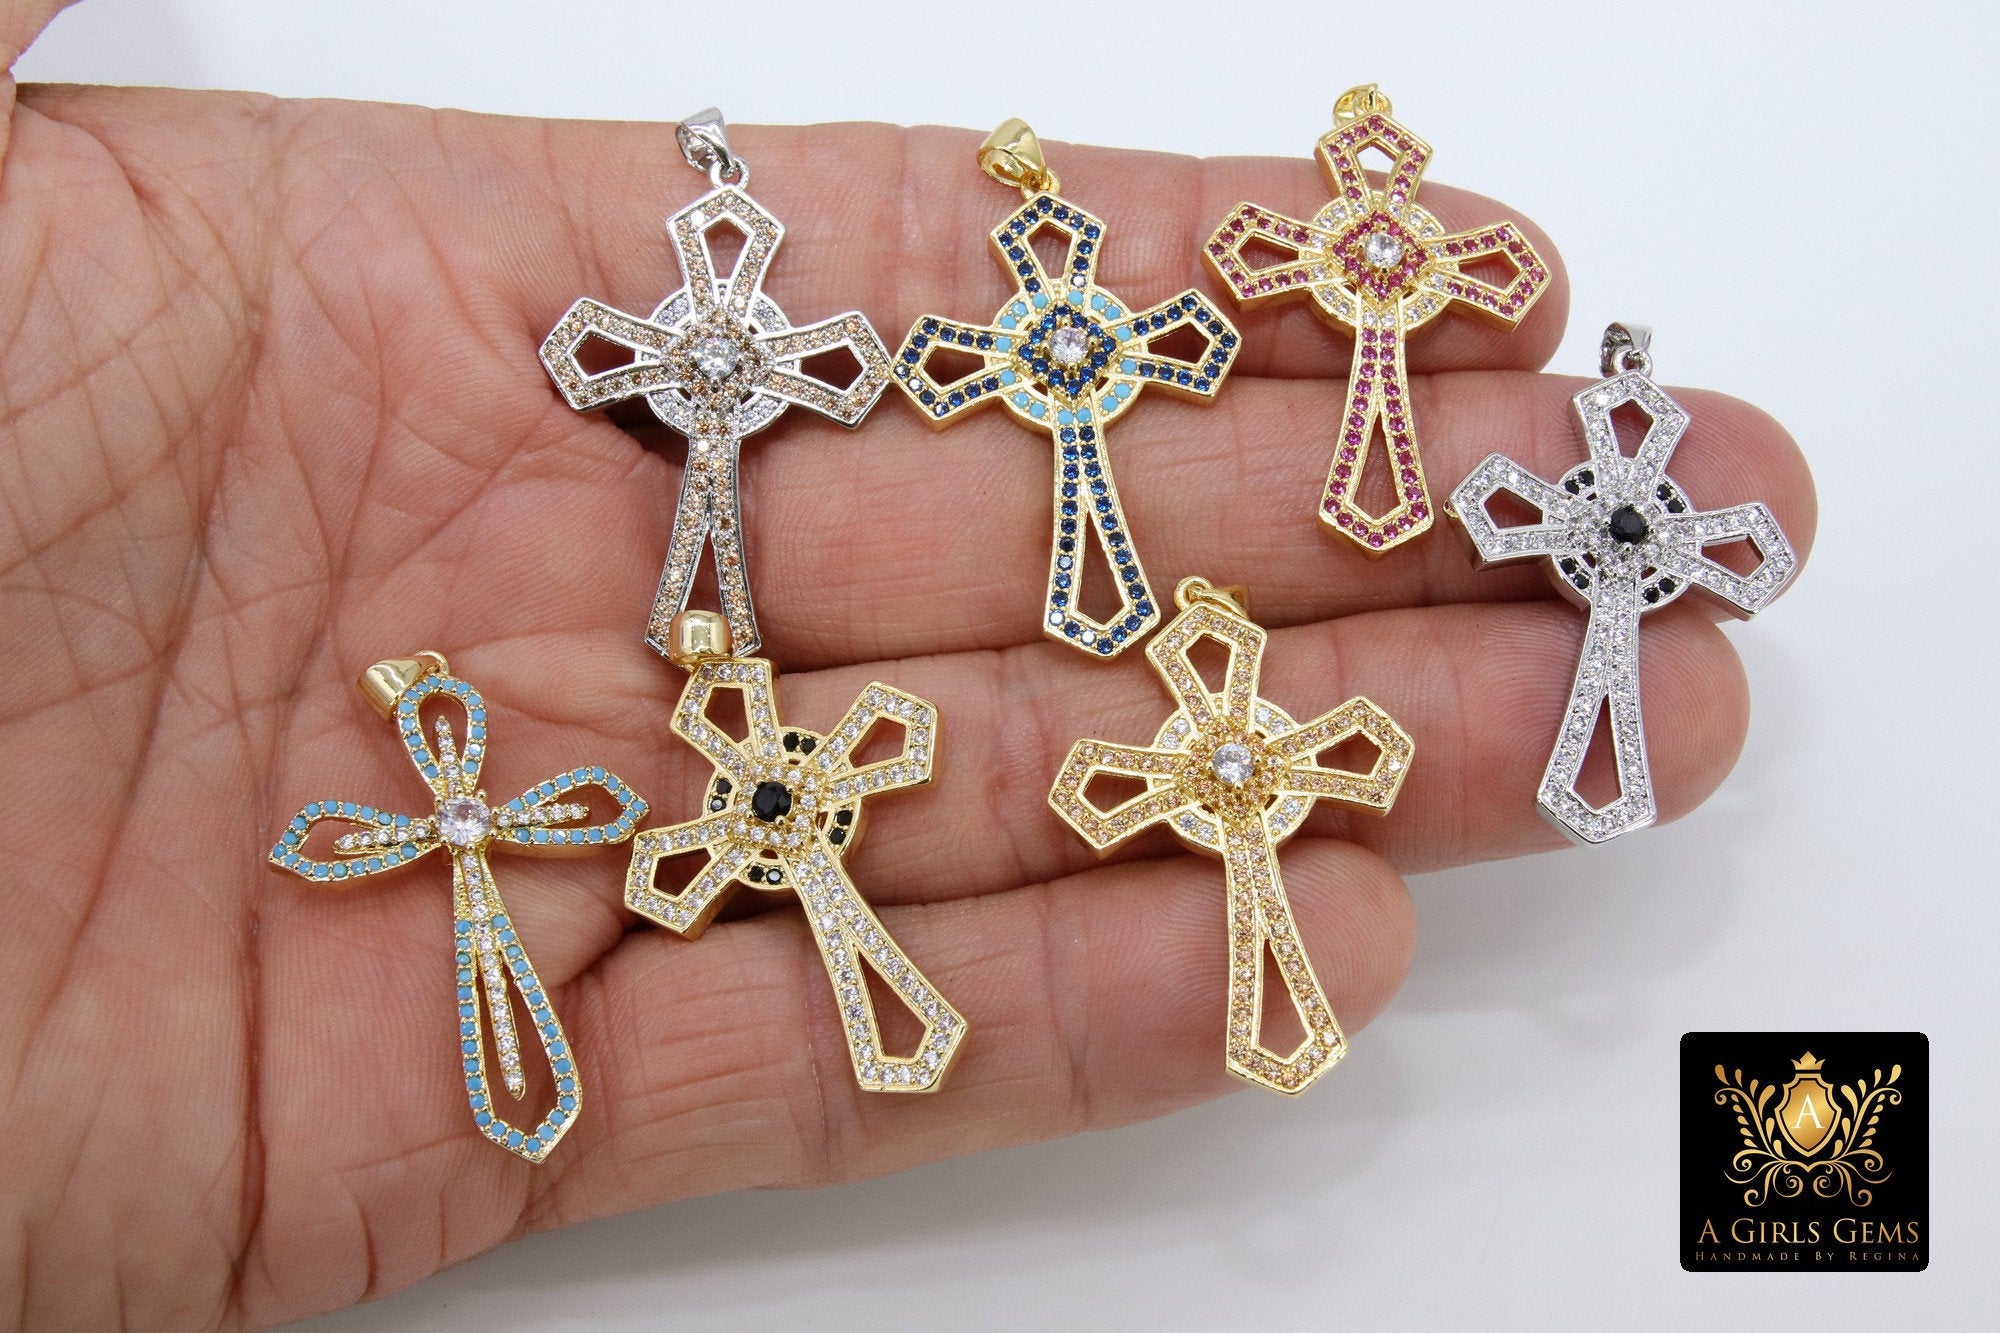 Large CZ Cross Pendant, CZ Micro Paved Silver, Gold Colorful Coptic Cross for Necklaces, Southwestern, Boho Style #449